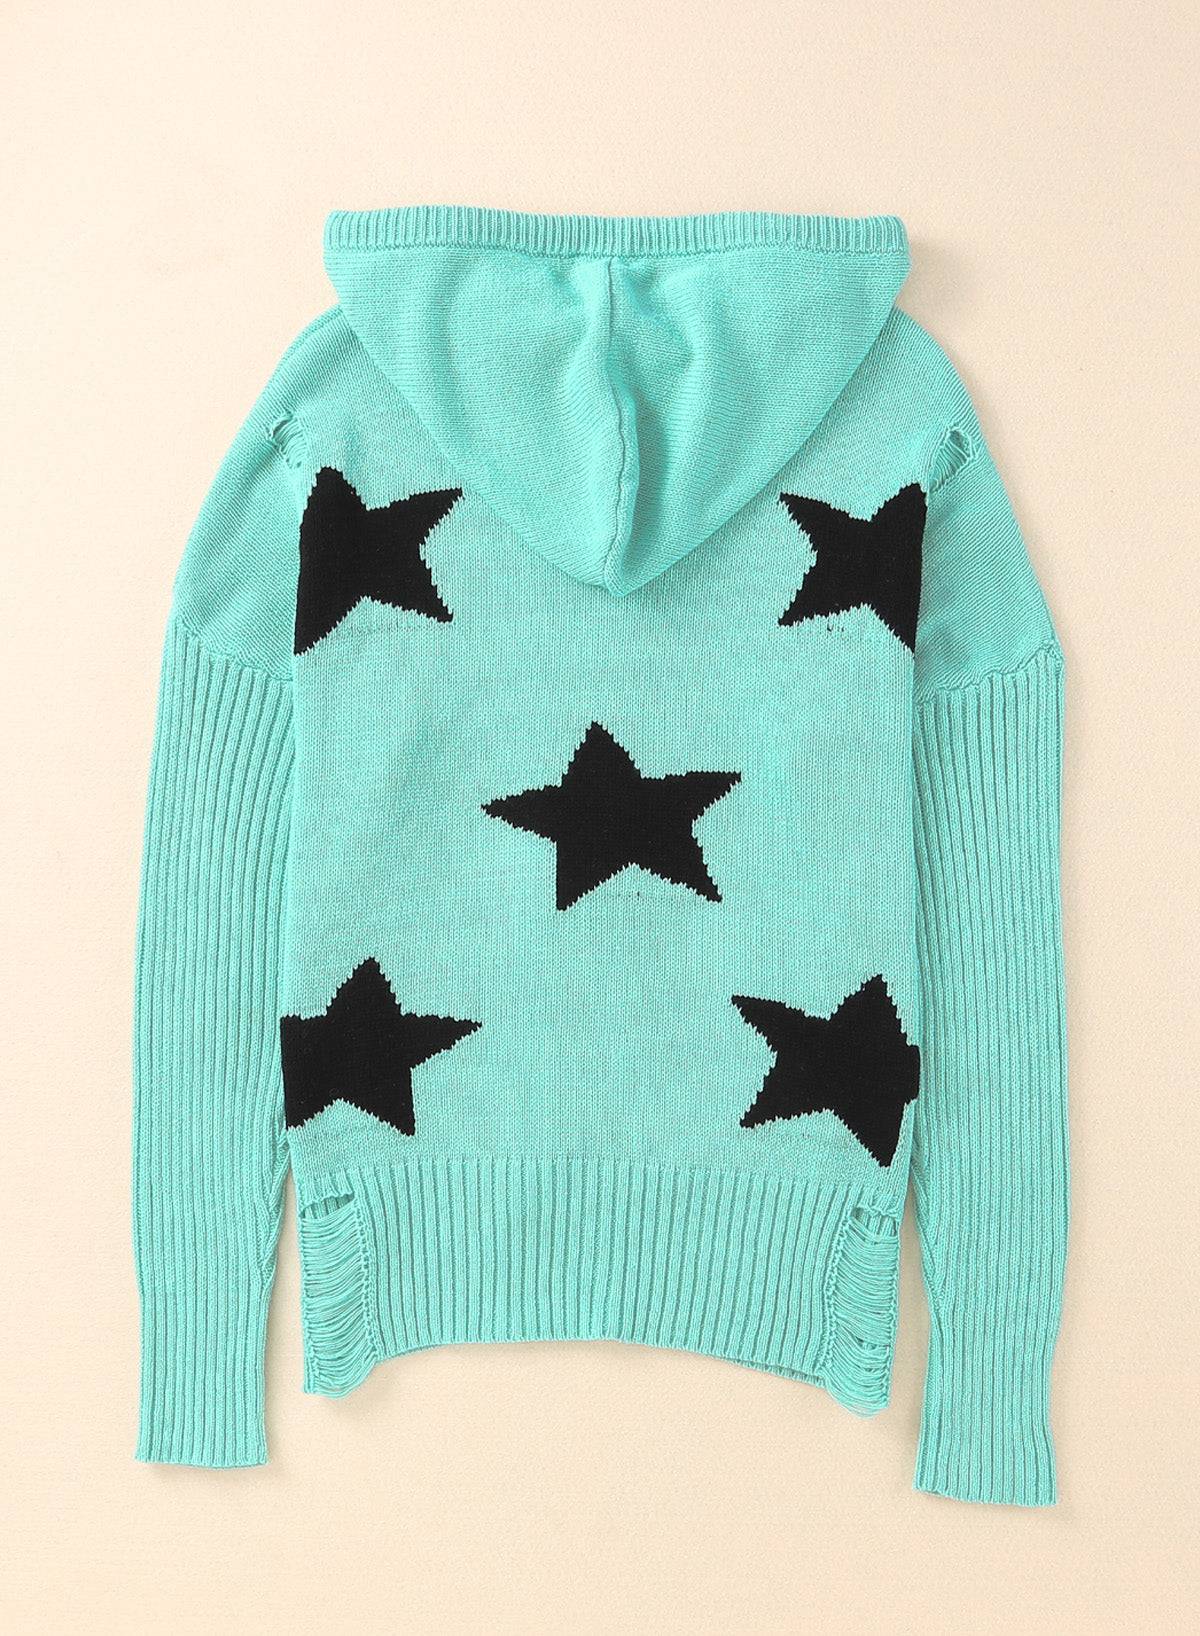 Starlight Embrace Hooded Sweater - Wrap Yourself in Heavenly Love - Feel Like a Goddess - Guy Christopher 